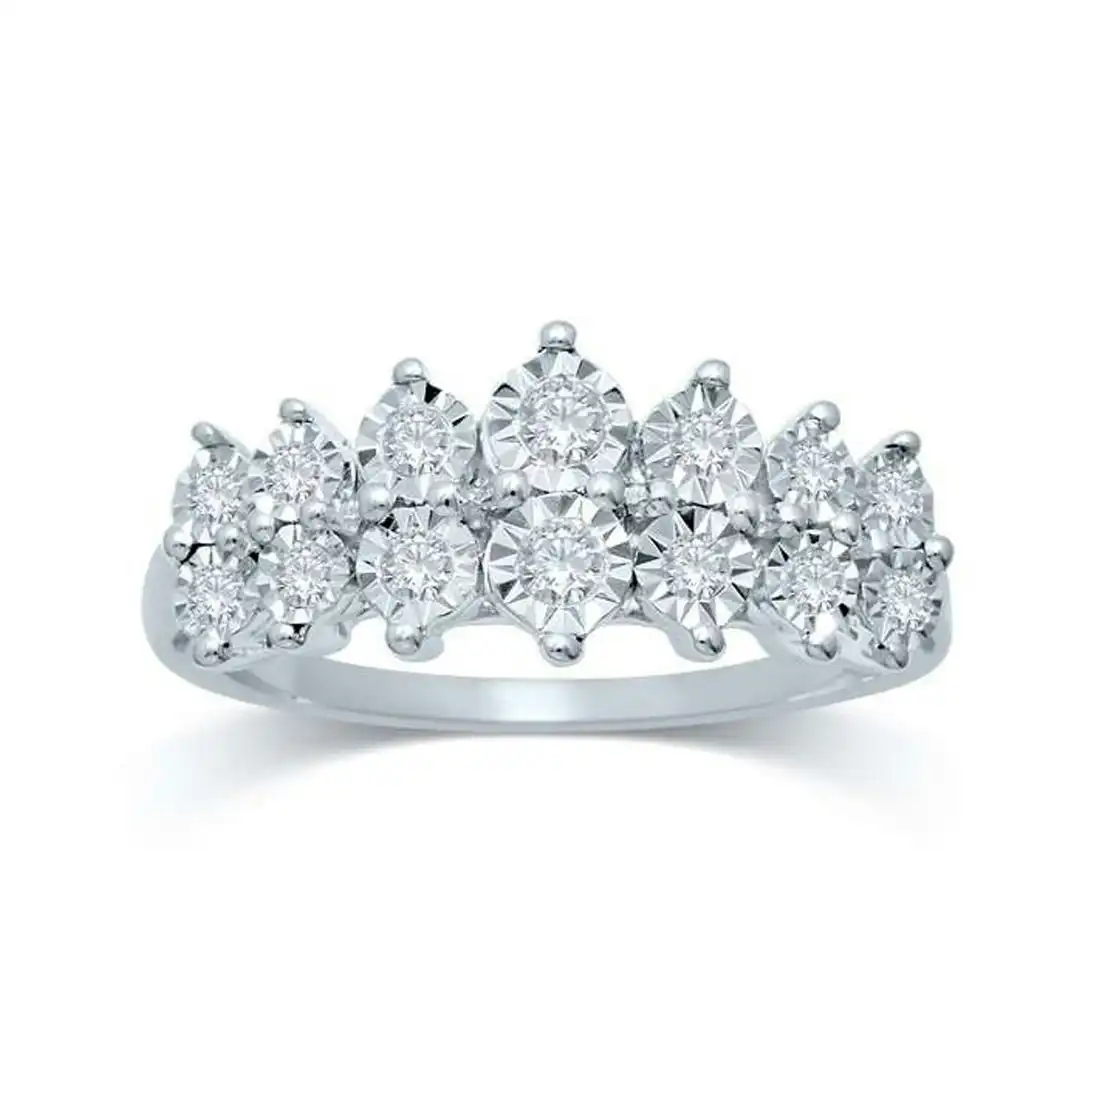 Brilliant Set 2 Row Ring with 1/4ct of Diamonds in 9ct White Gold